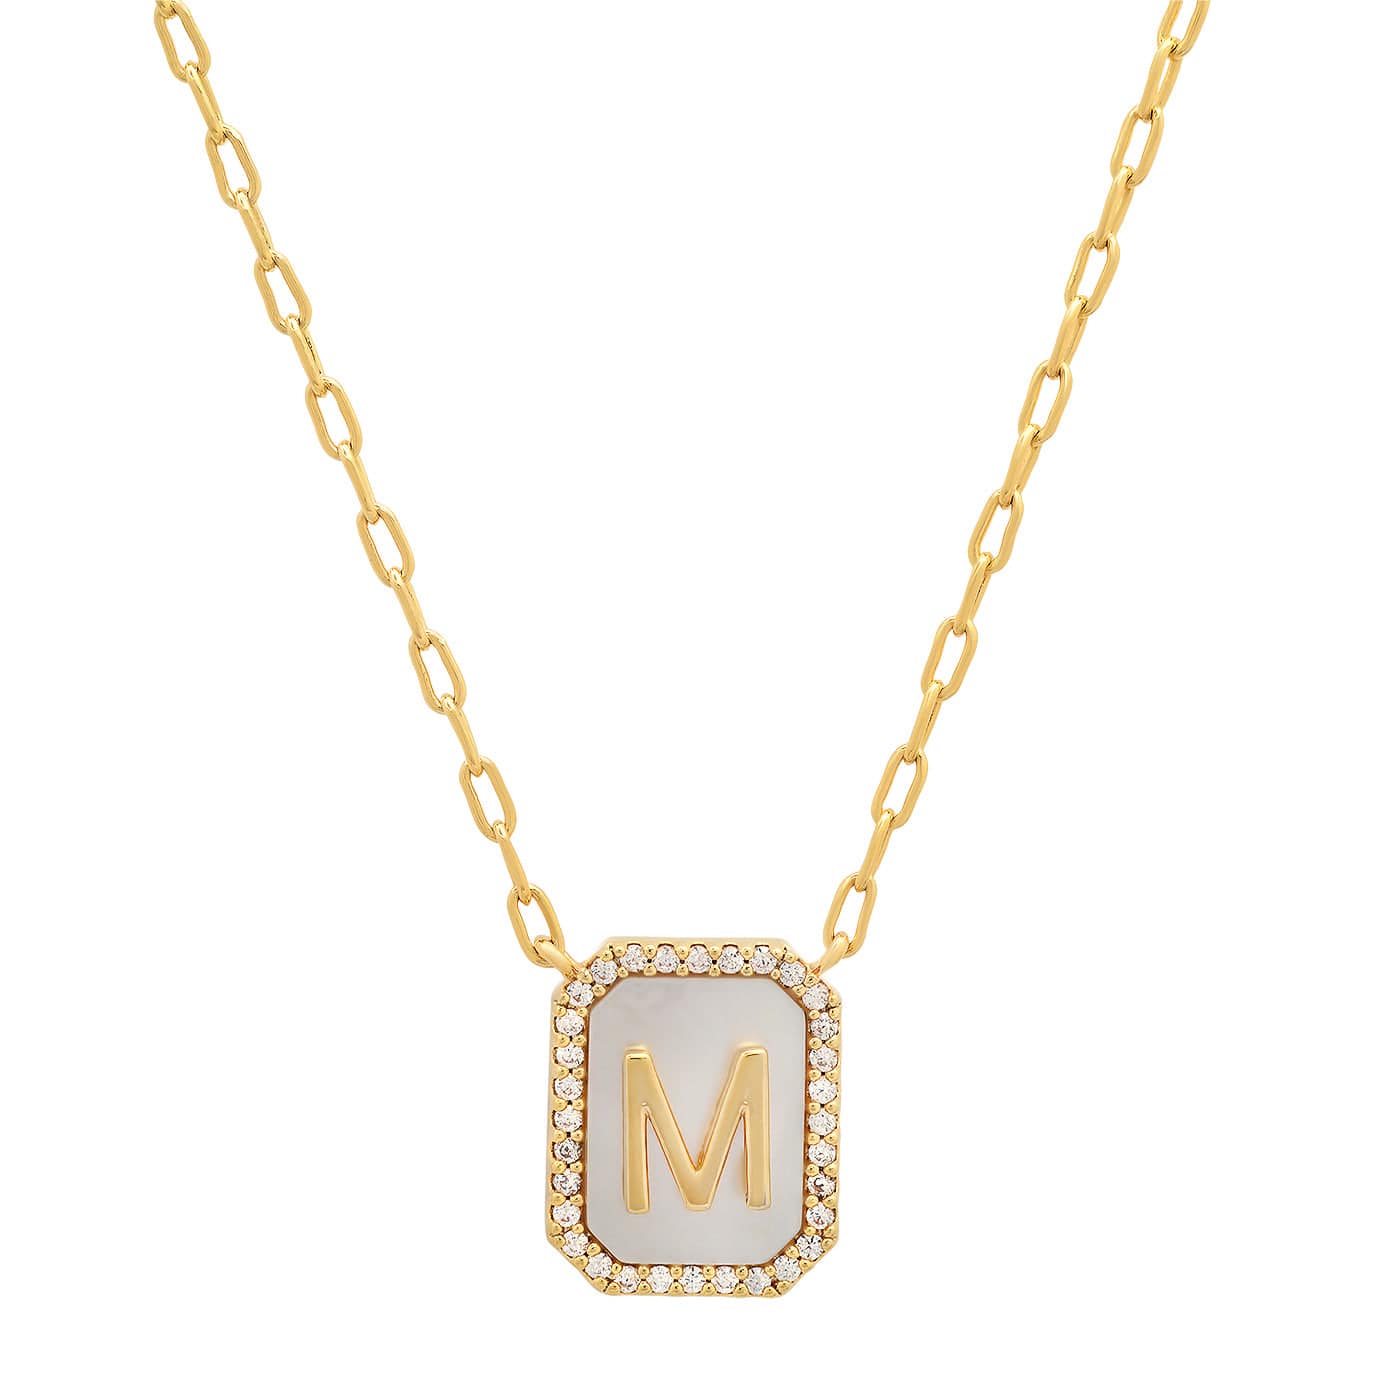 TAI JEWELRY Necklace M Mother Of Pearl Monogram Necklace